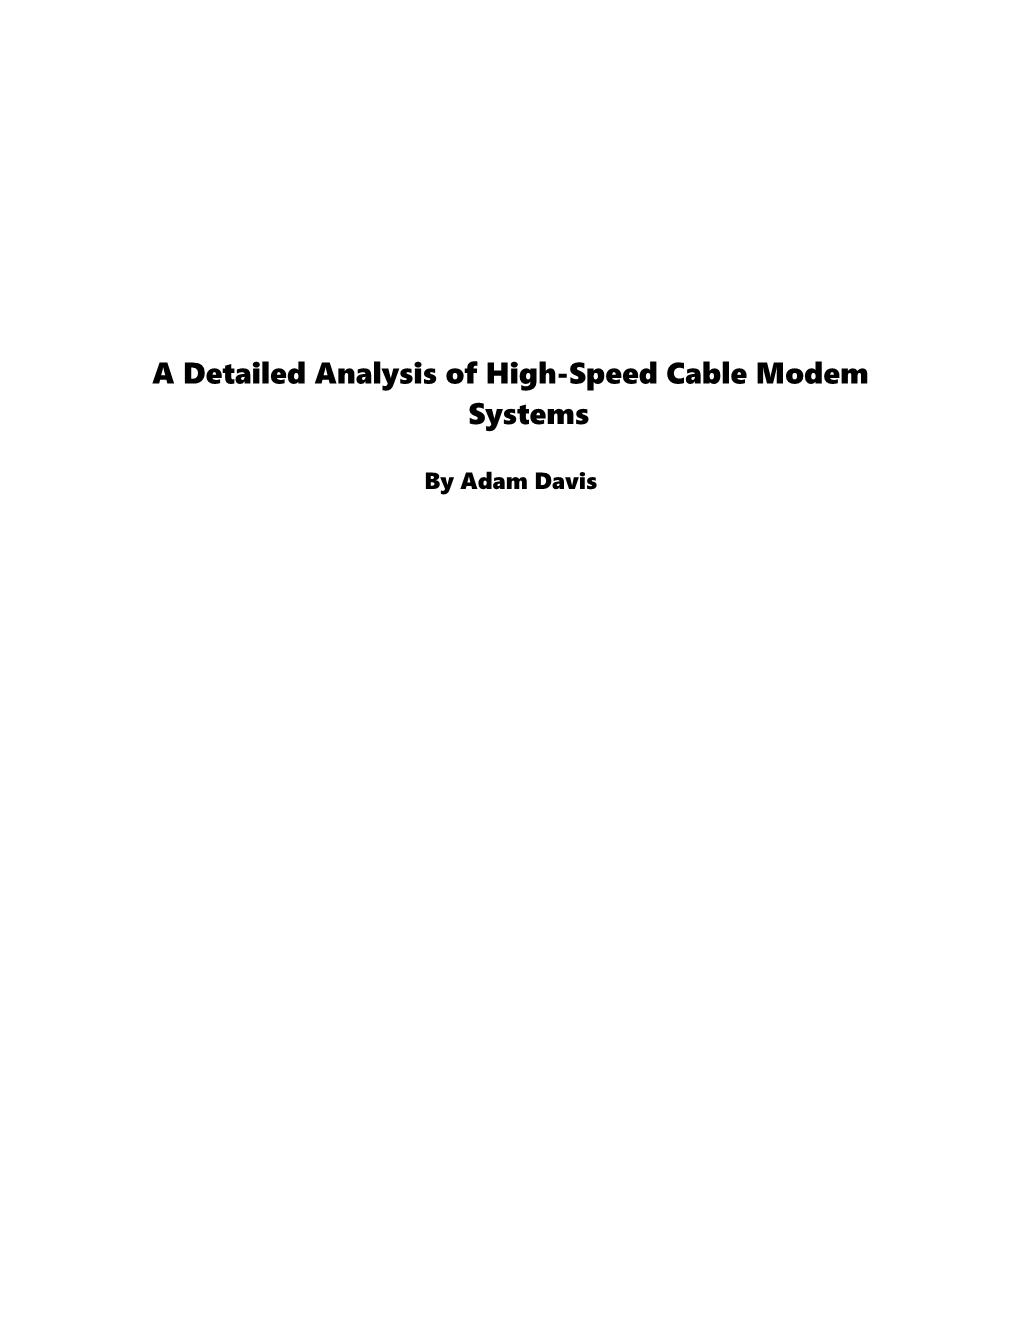 A Detailed Analysis of High-Speed Cable Modem Systems